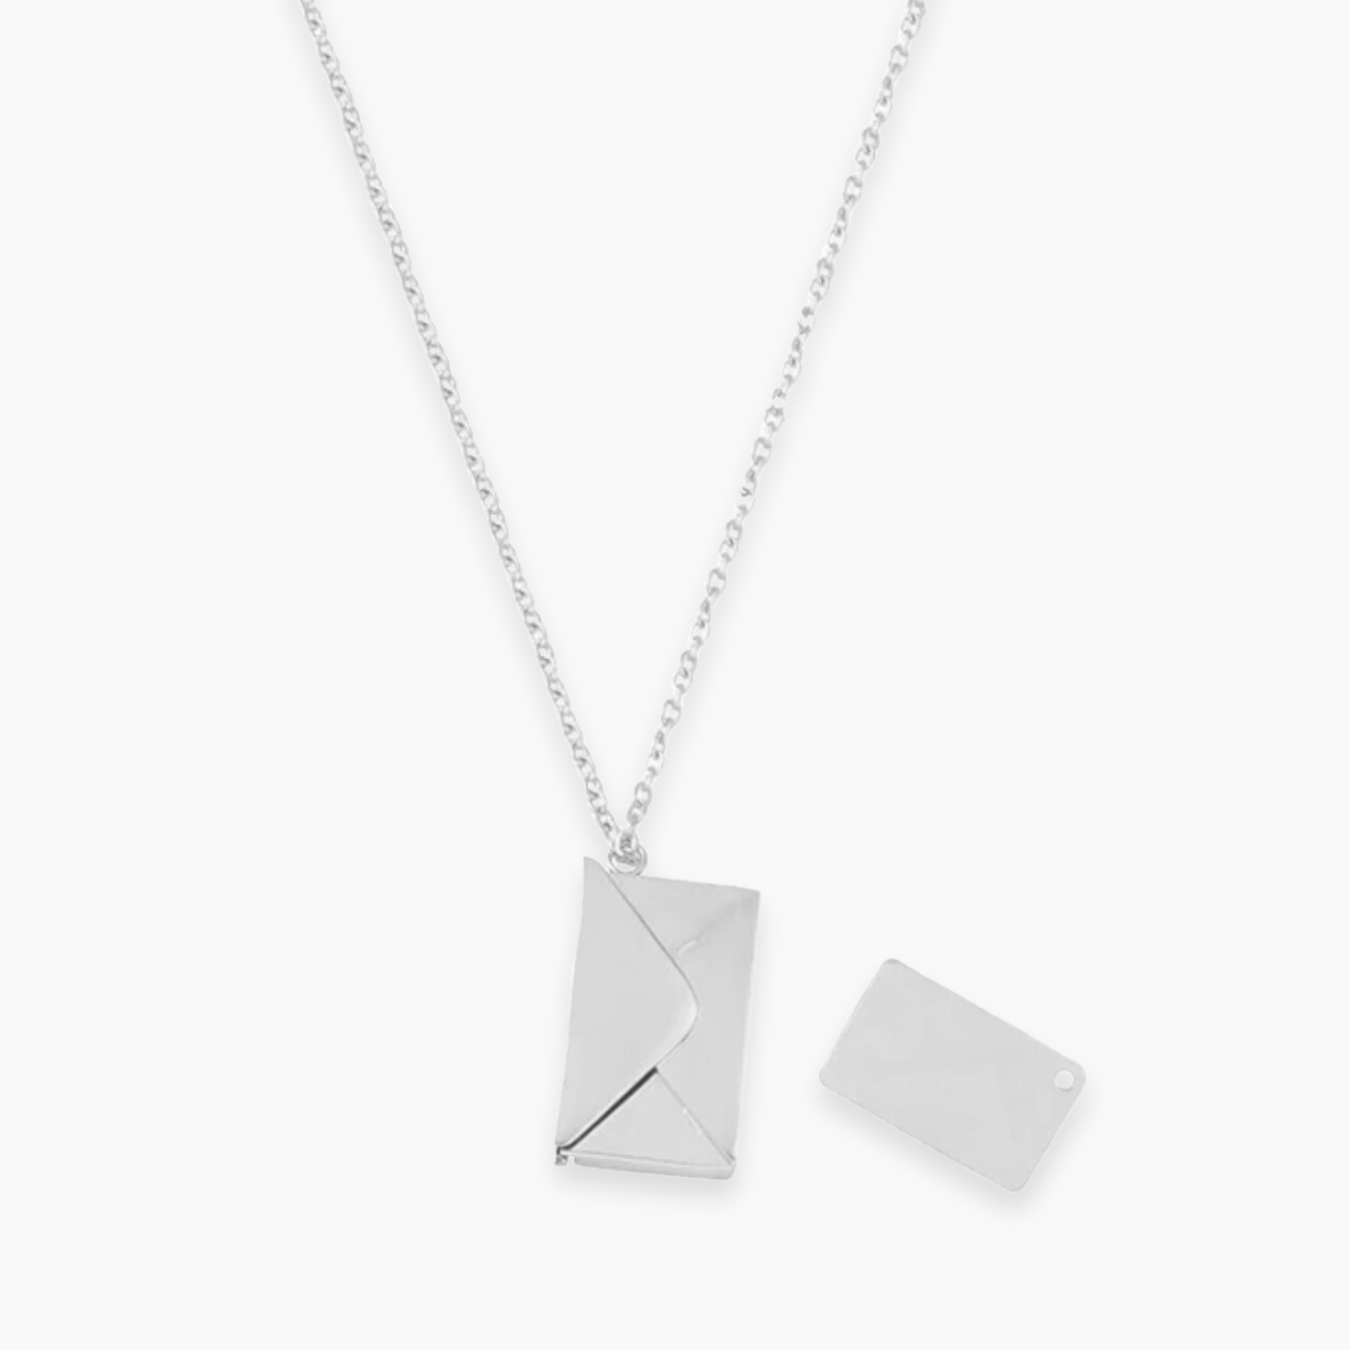 LOVE NOTE Personalizable Necklace | Coordinates